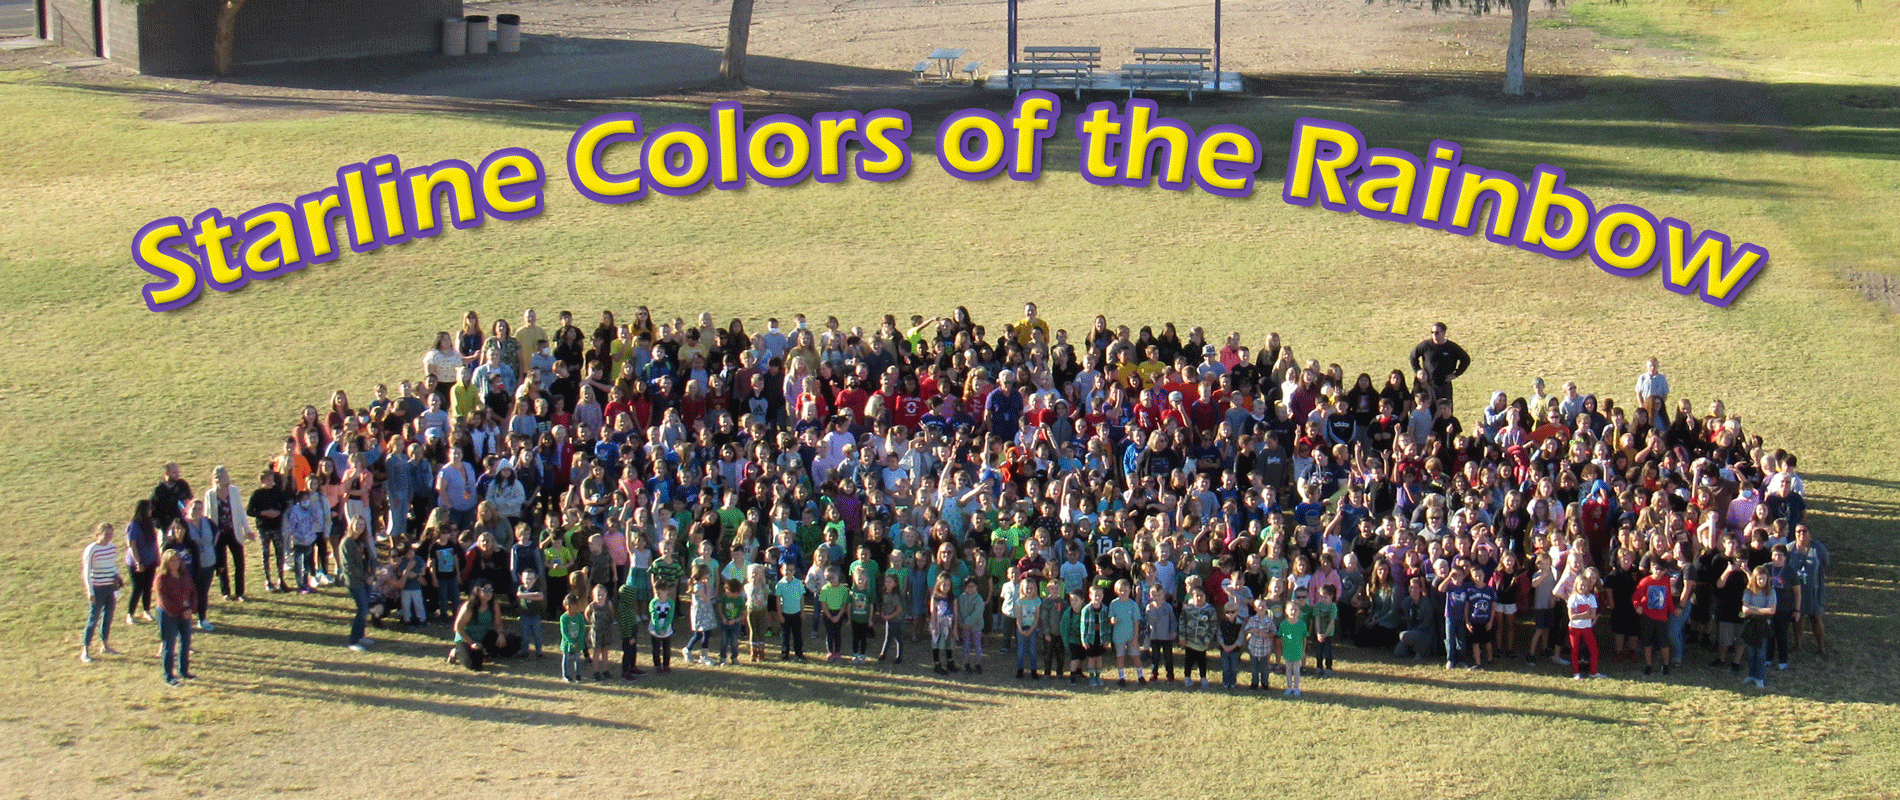 Starline students on field in rainbow colors